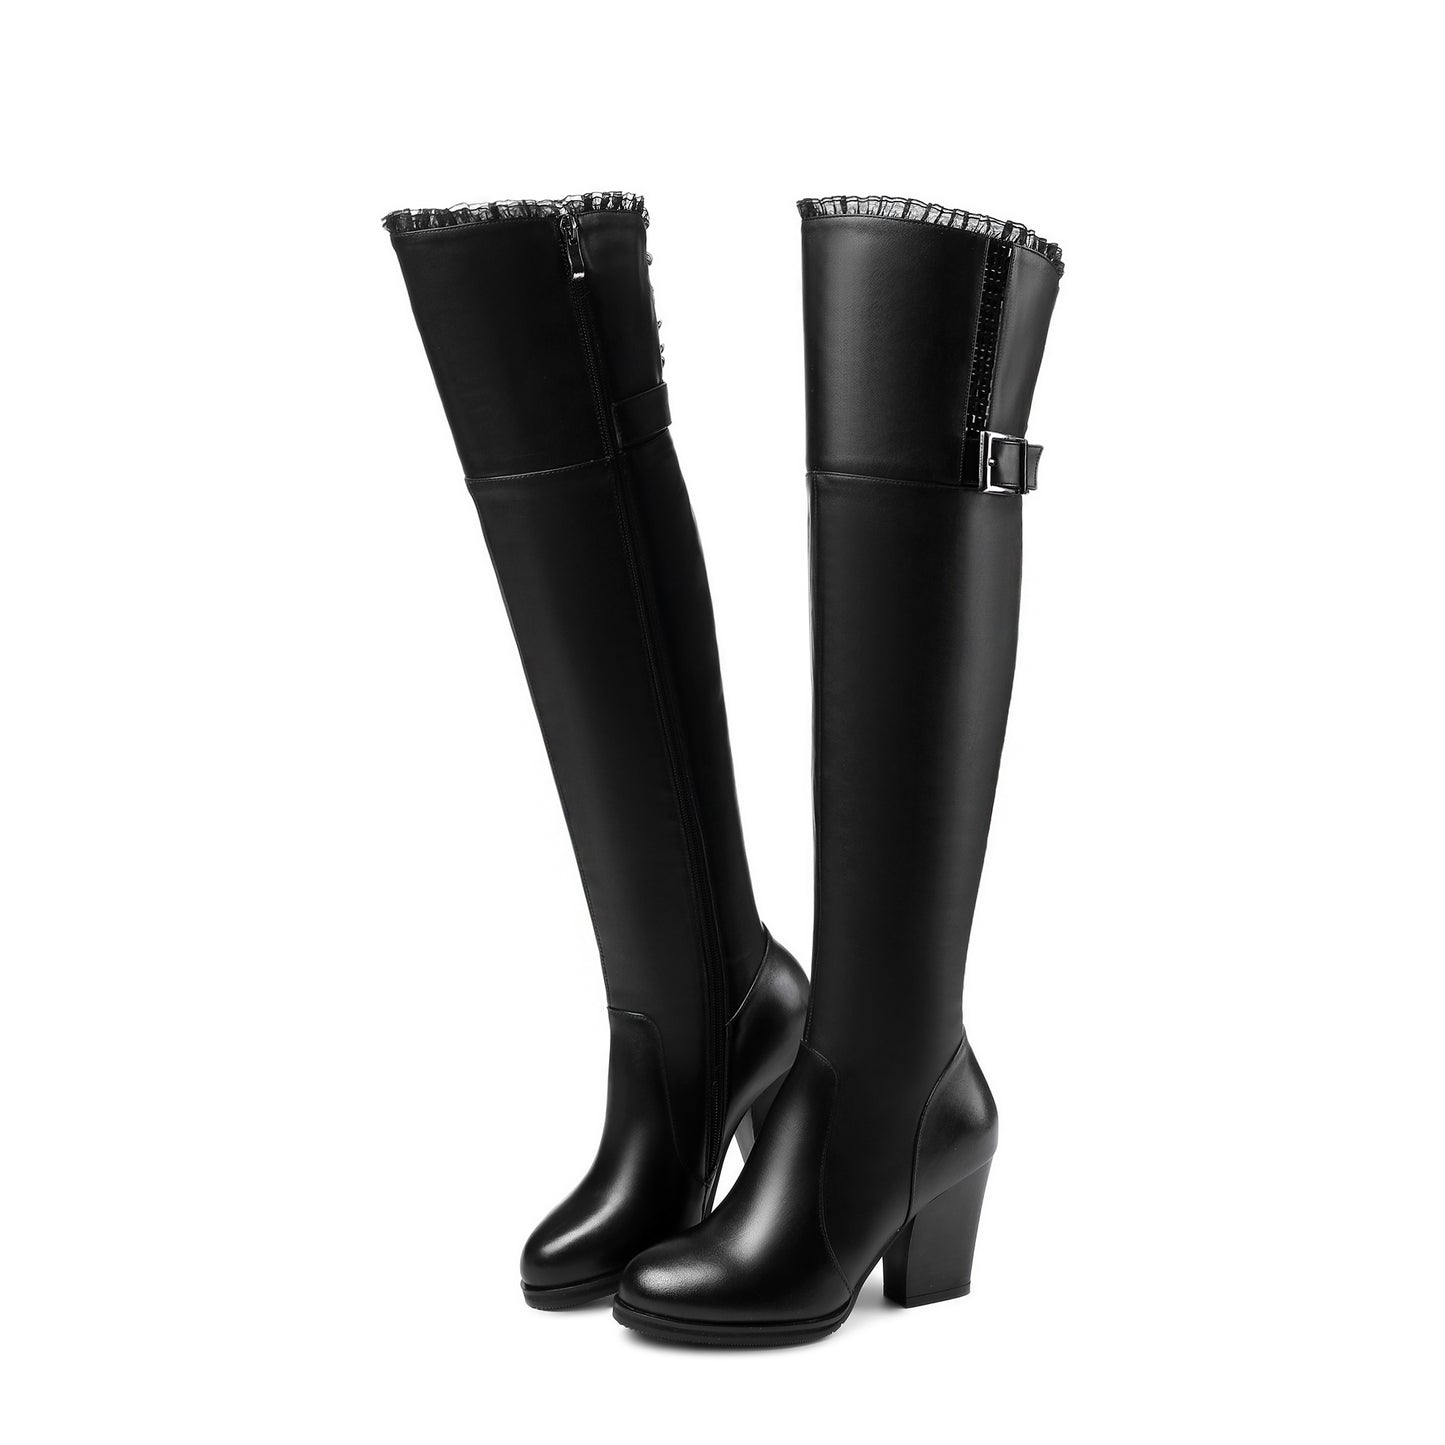 TinaCus Genuine Leather Women's Handmade Round Toe Side Zip Up High Chunky Heel Over the Knee Boots with Cool Buckle